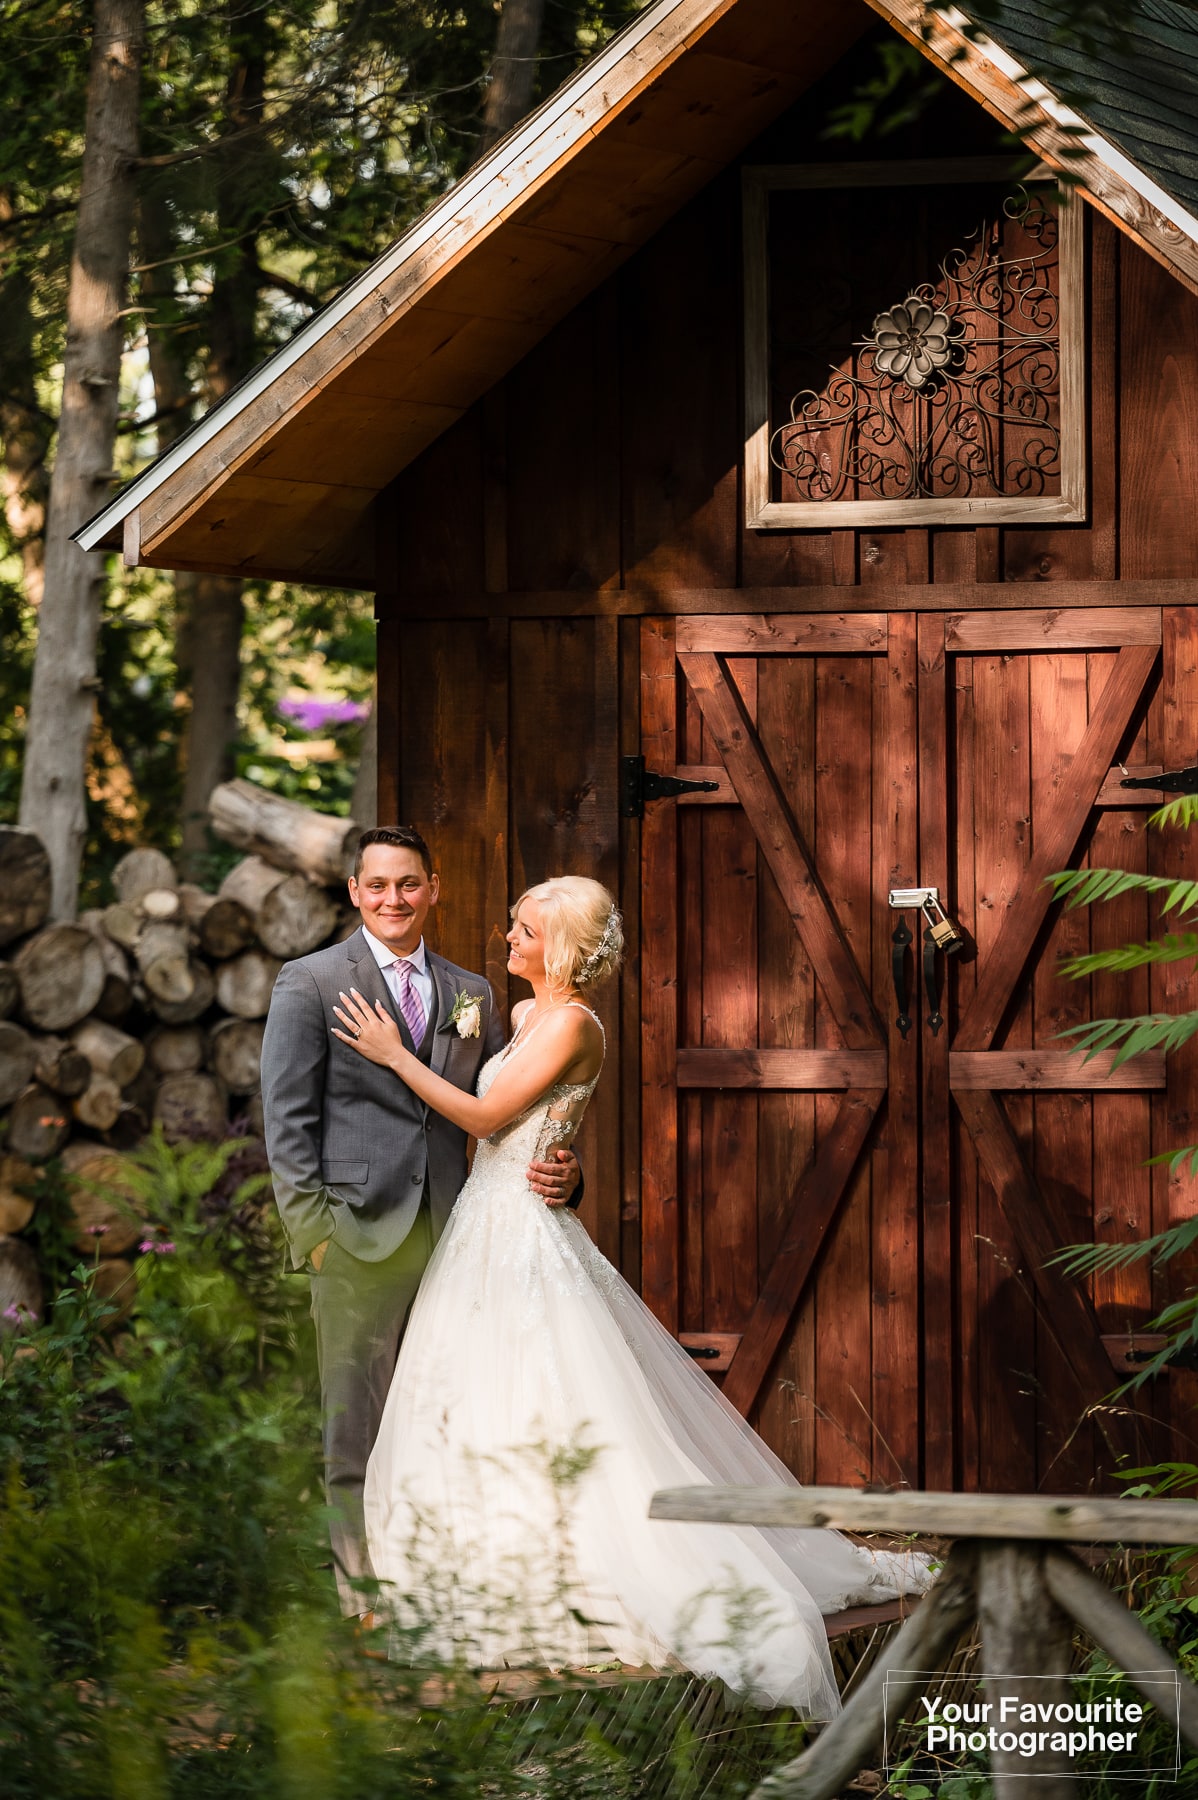 Formal photo of bride and groom at rustic location